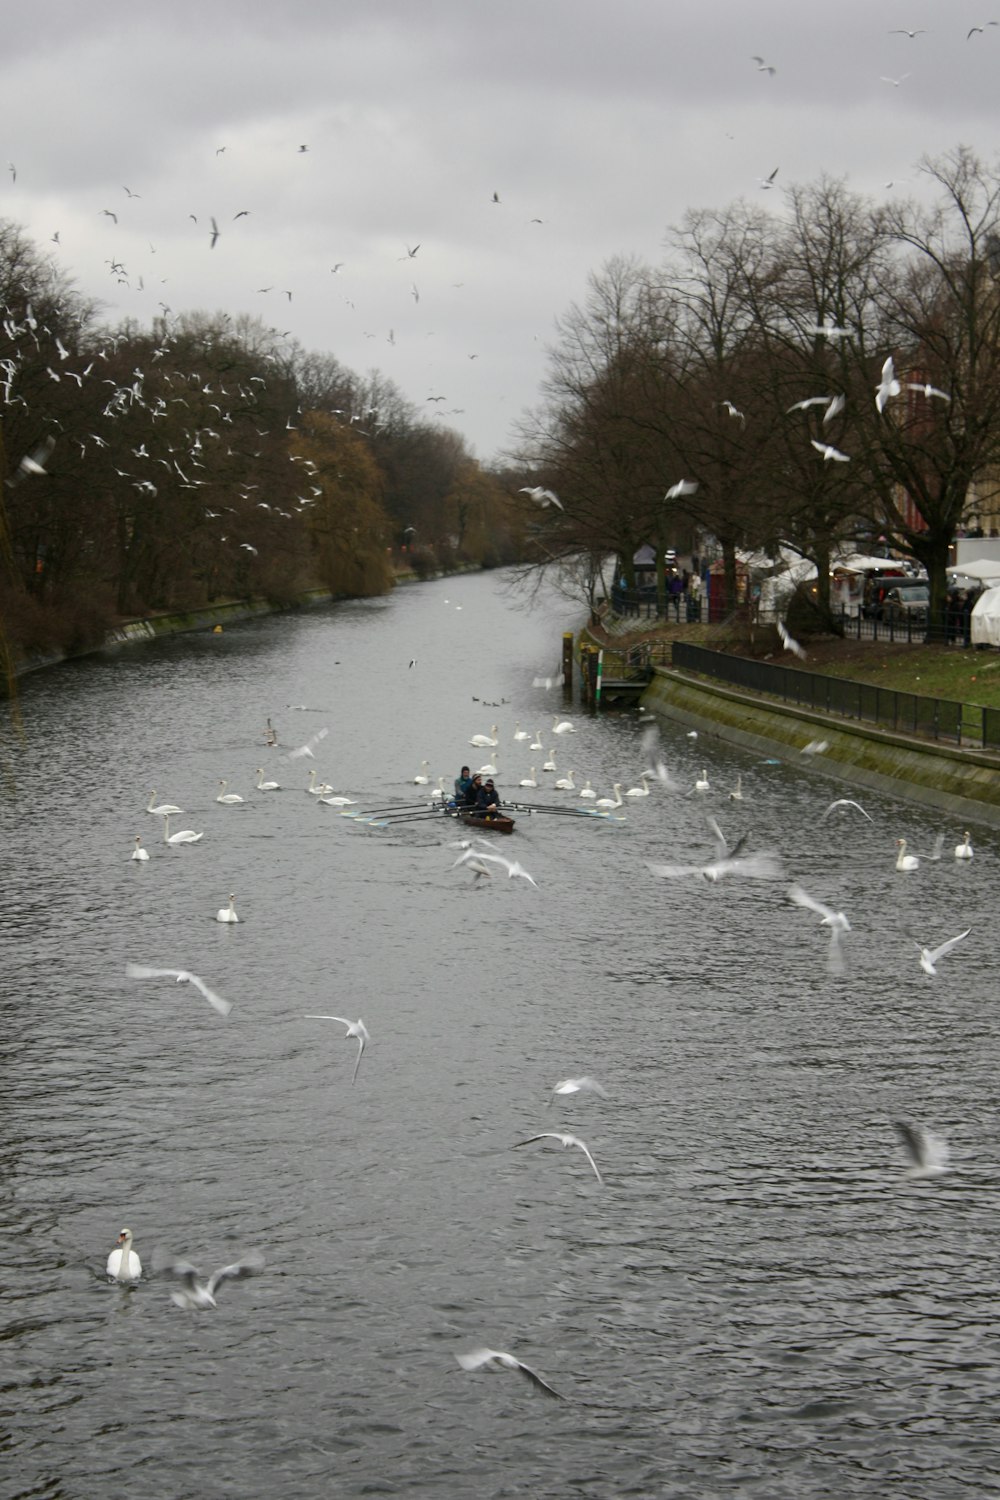 a group of birds flying over a river next to a boat